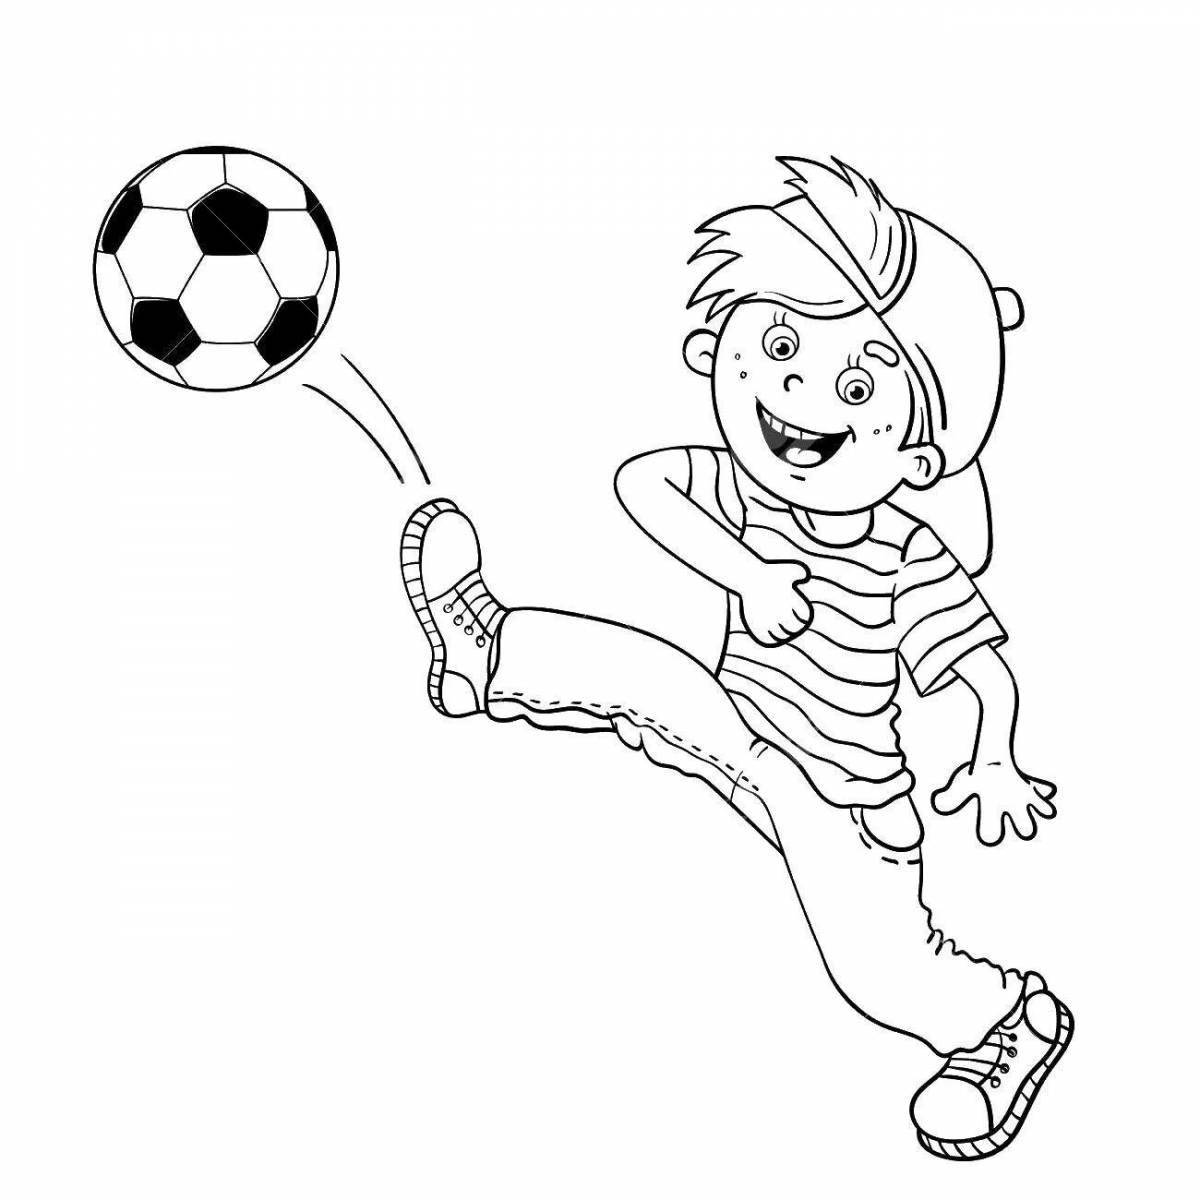 Coloring page glowing boy playing football